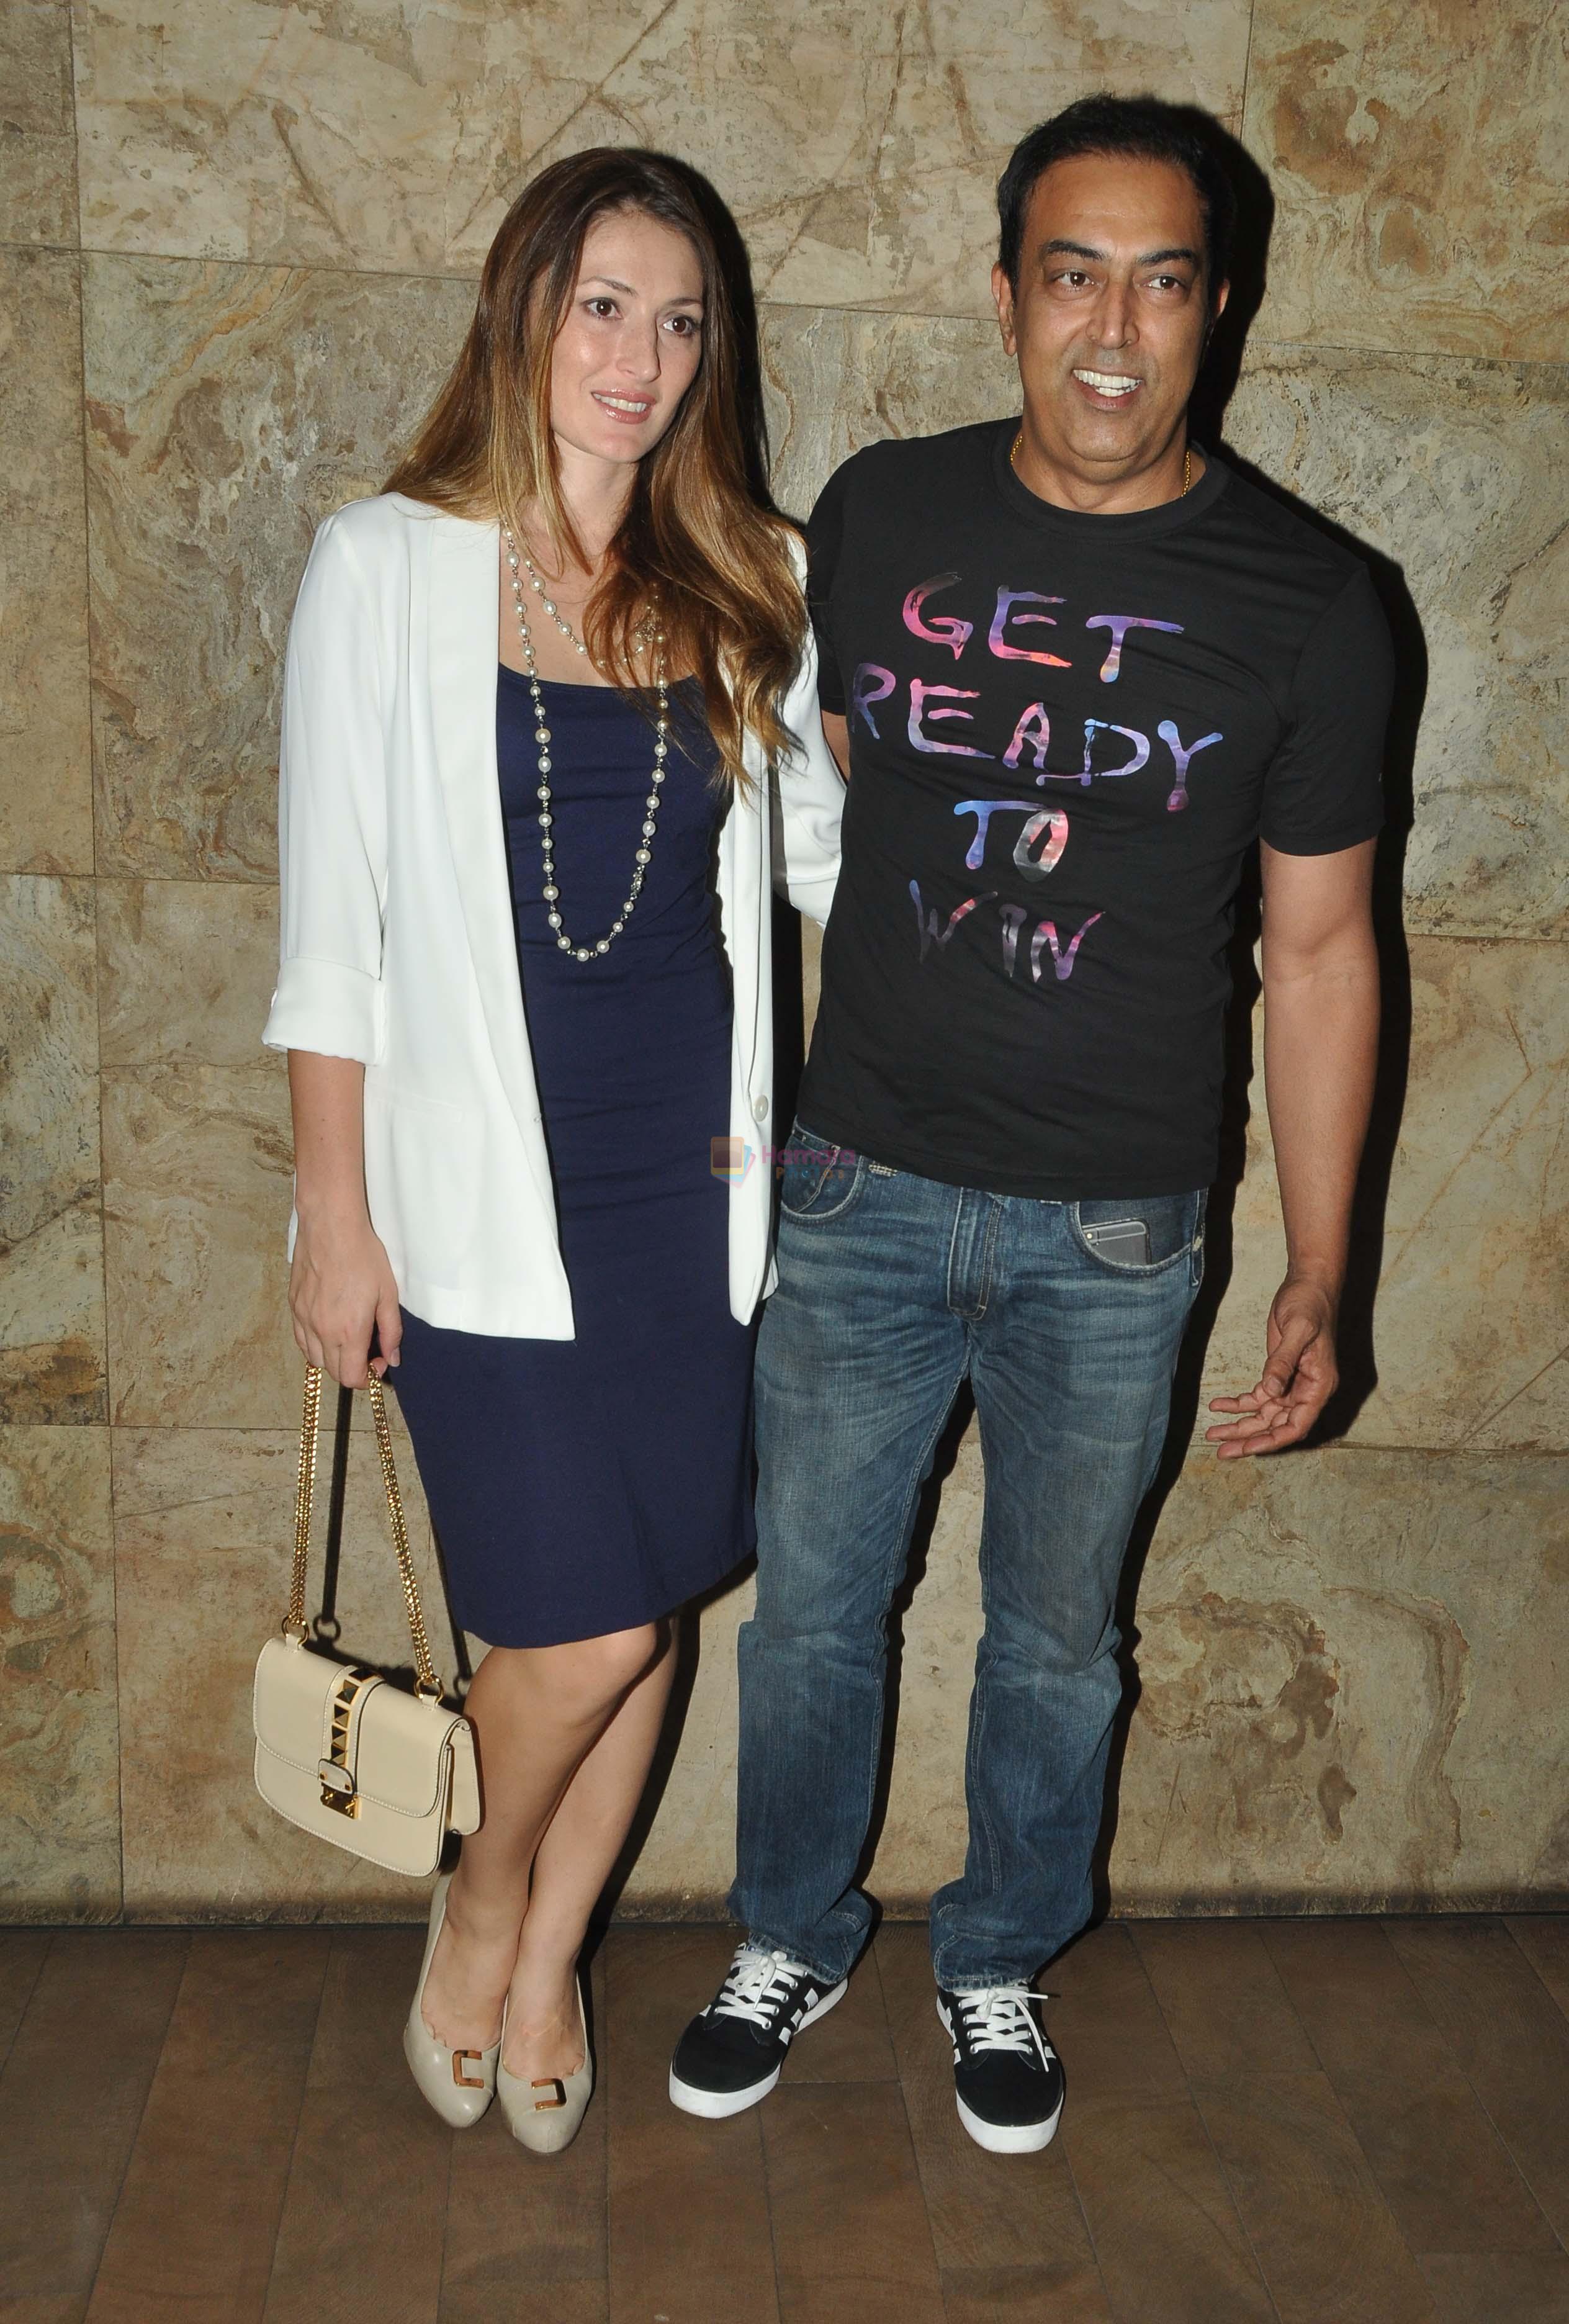 Vindu Dara Singh with wife Dina at the screening of Hollywood movie Transporter Refuelled hosted by Joe Rajan at Light Box Theatre